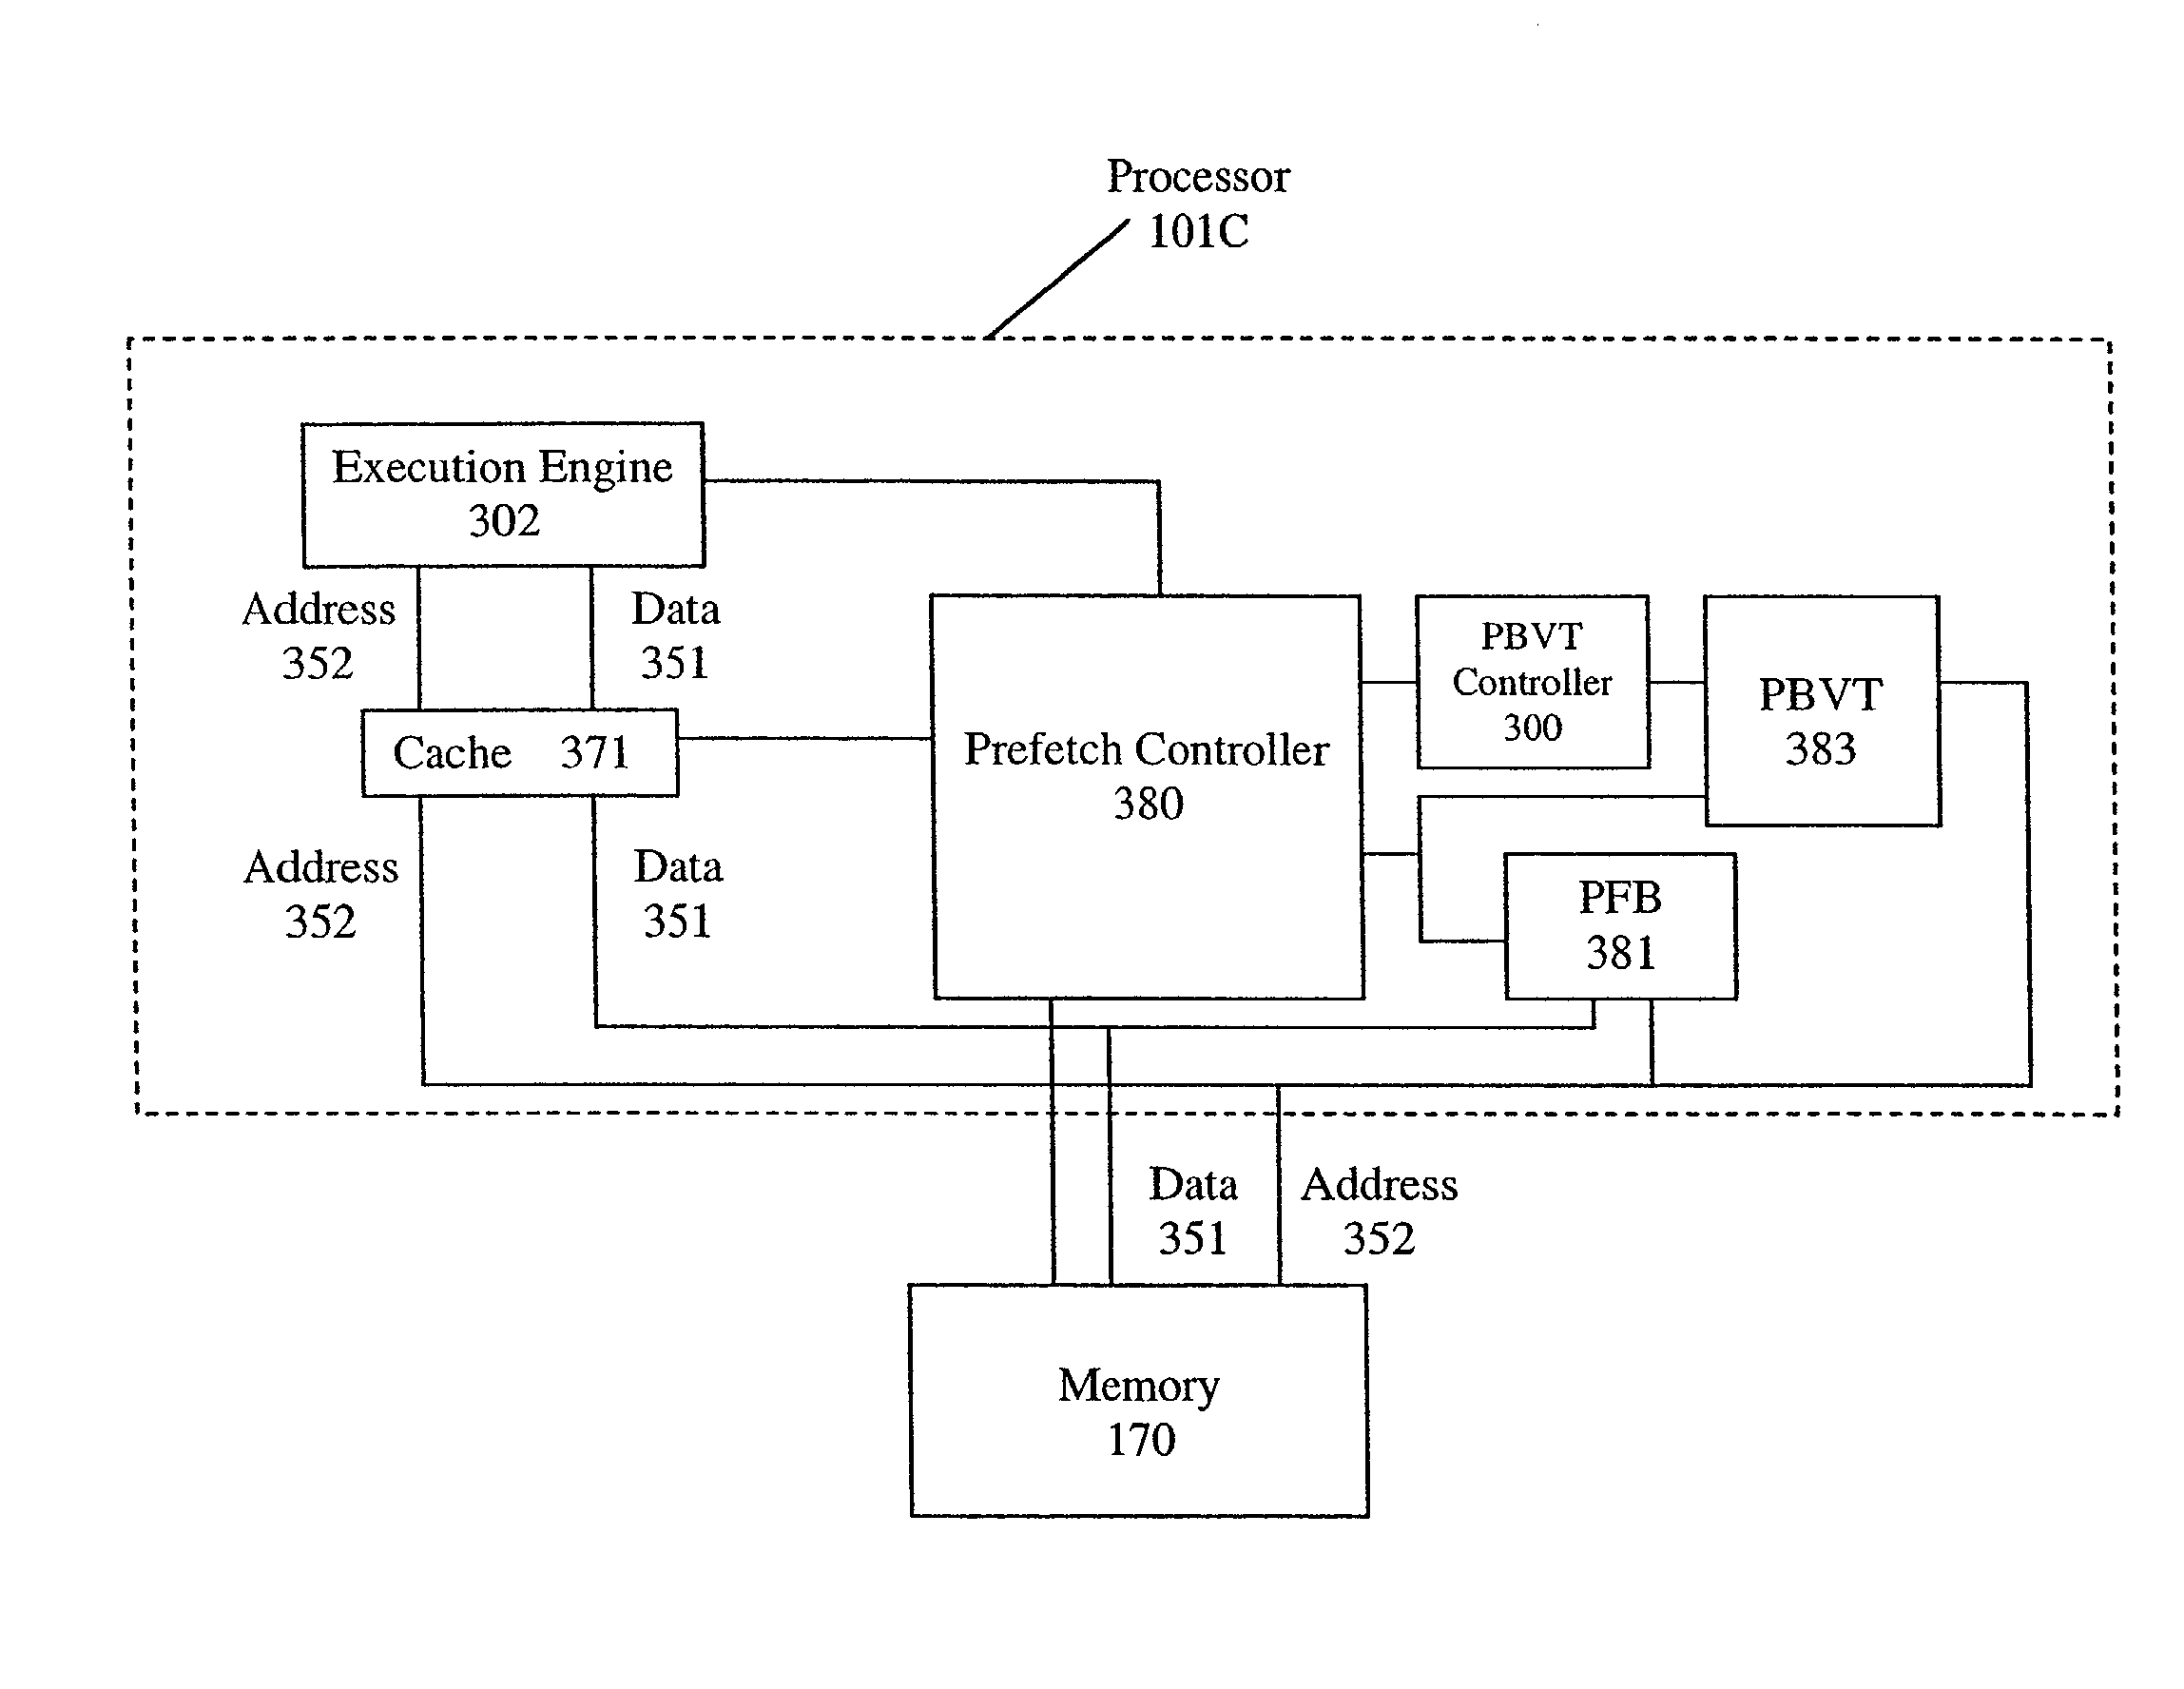 Method and apparatus for filtering prefetches to provide high prefetch accuracy using less hardware